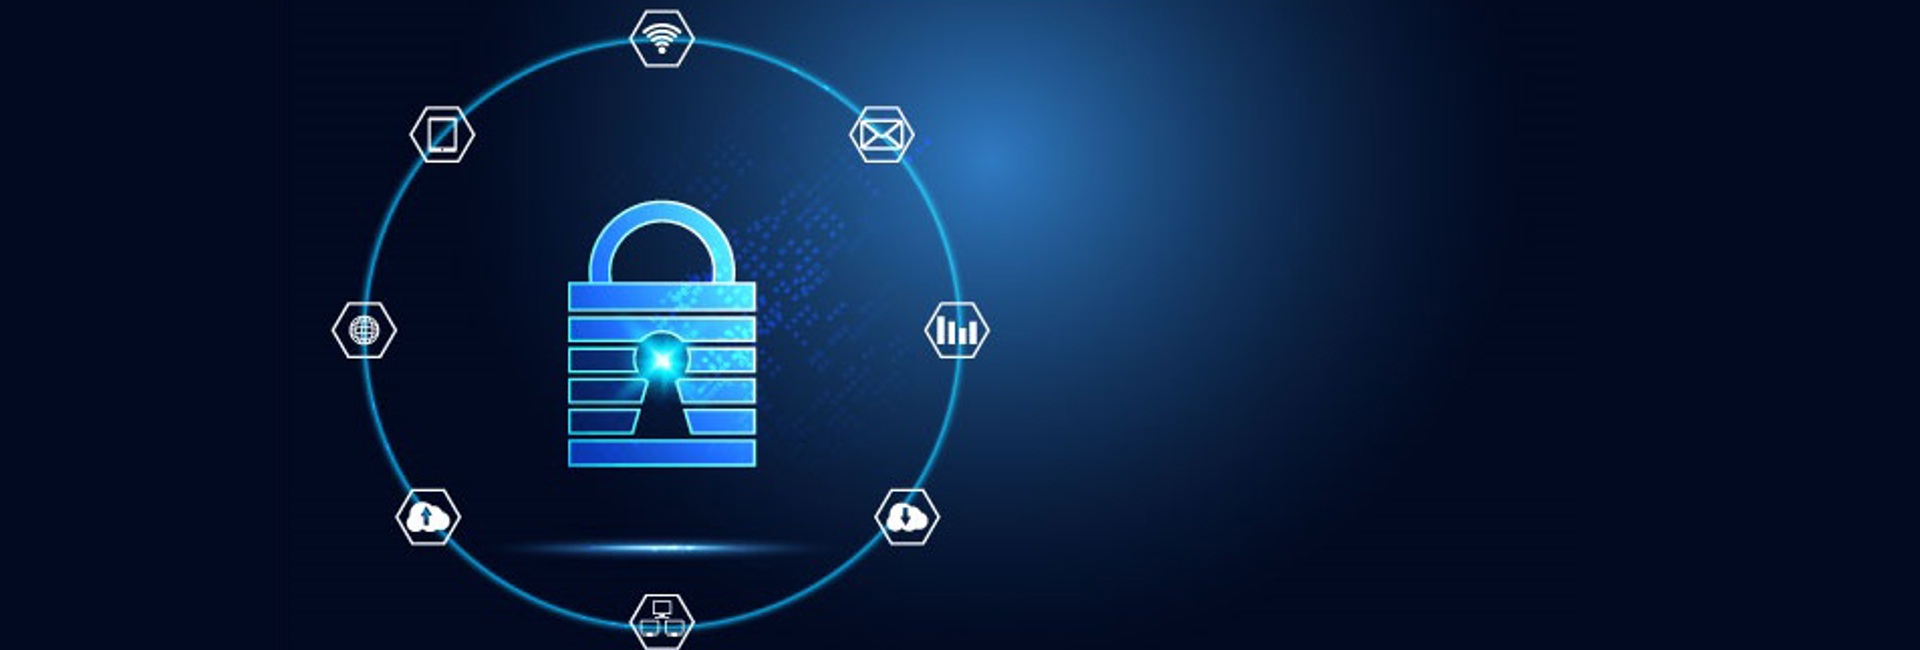 Padlock with a ring of icons for digital assets, systems, and data - demonstrating a strong IT Security Posture 